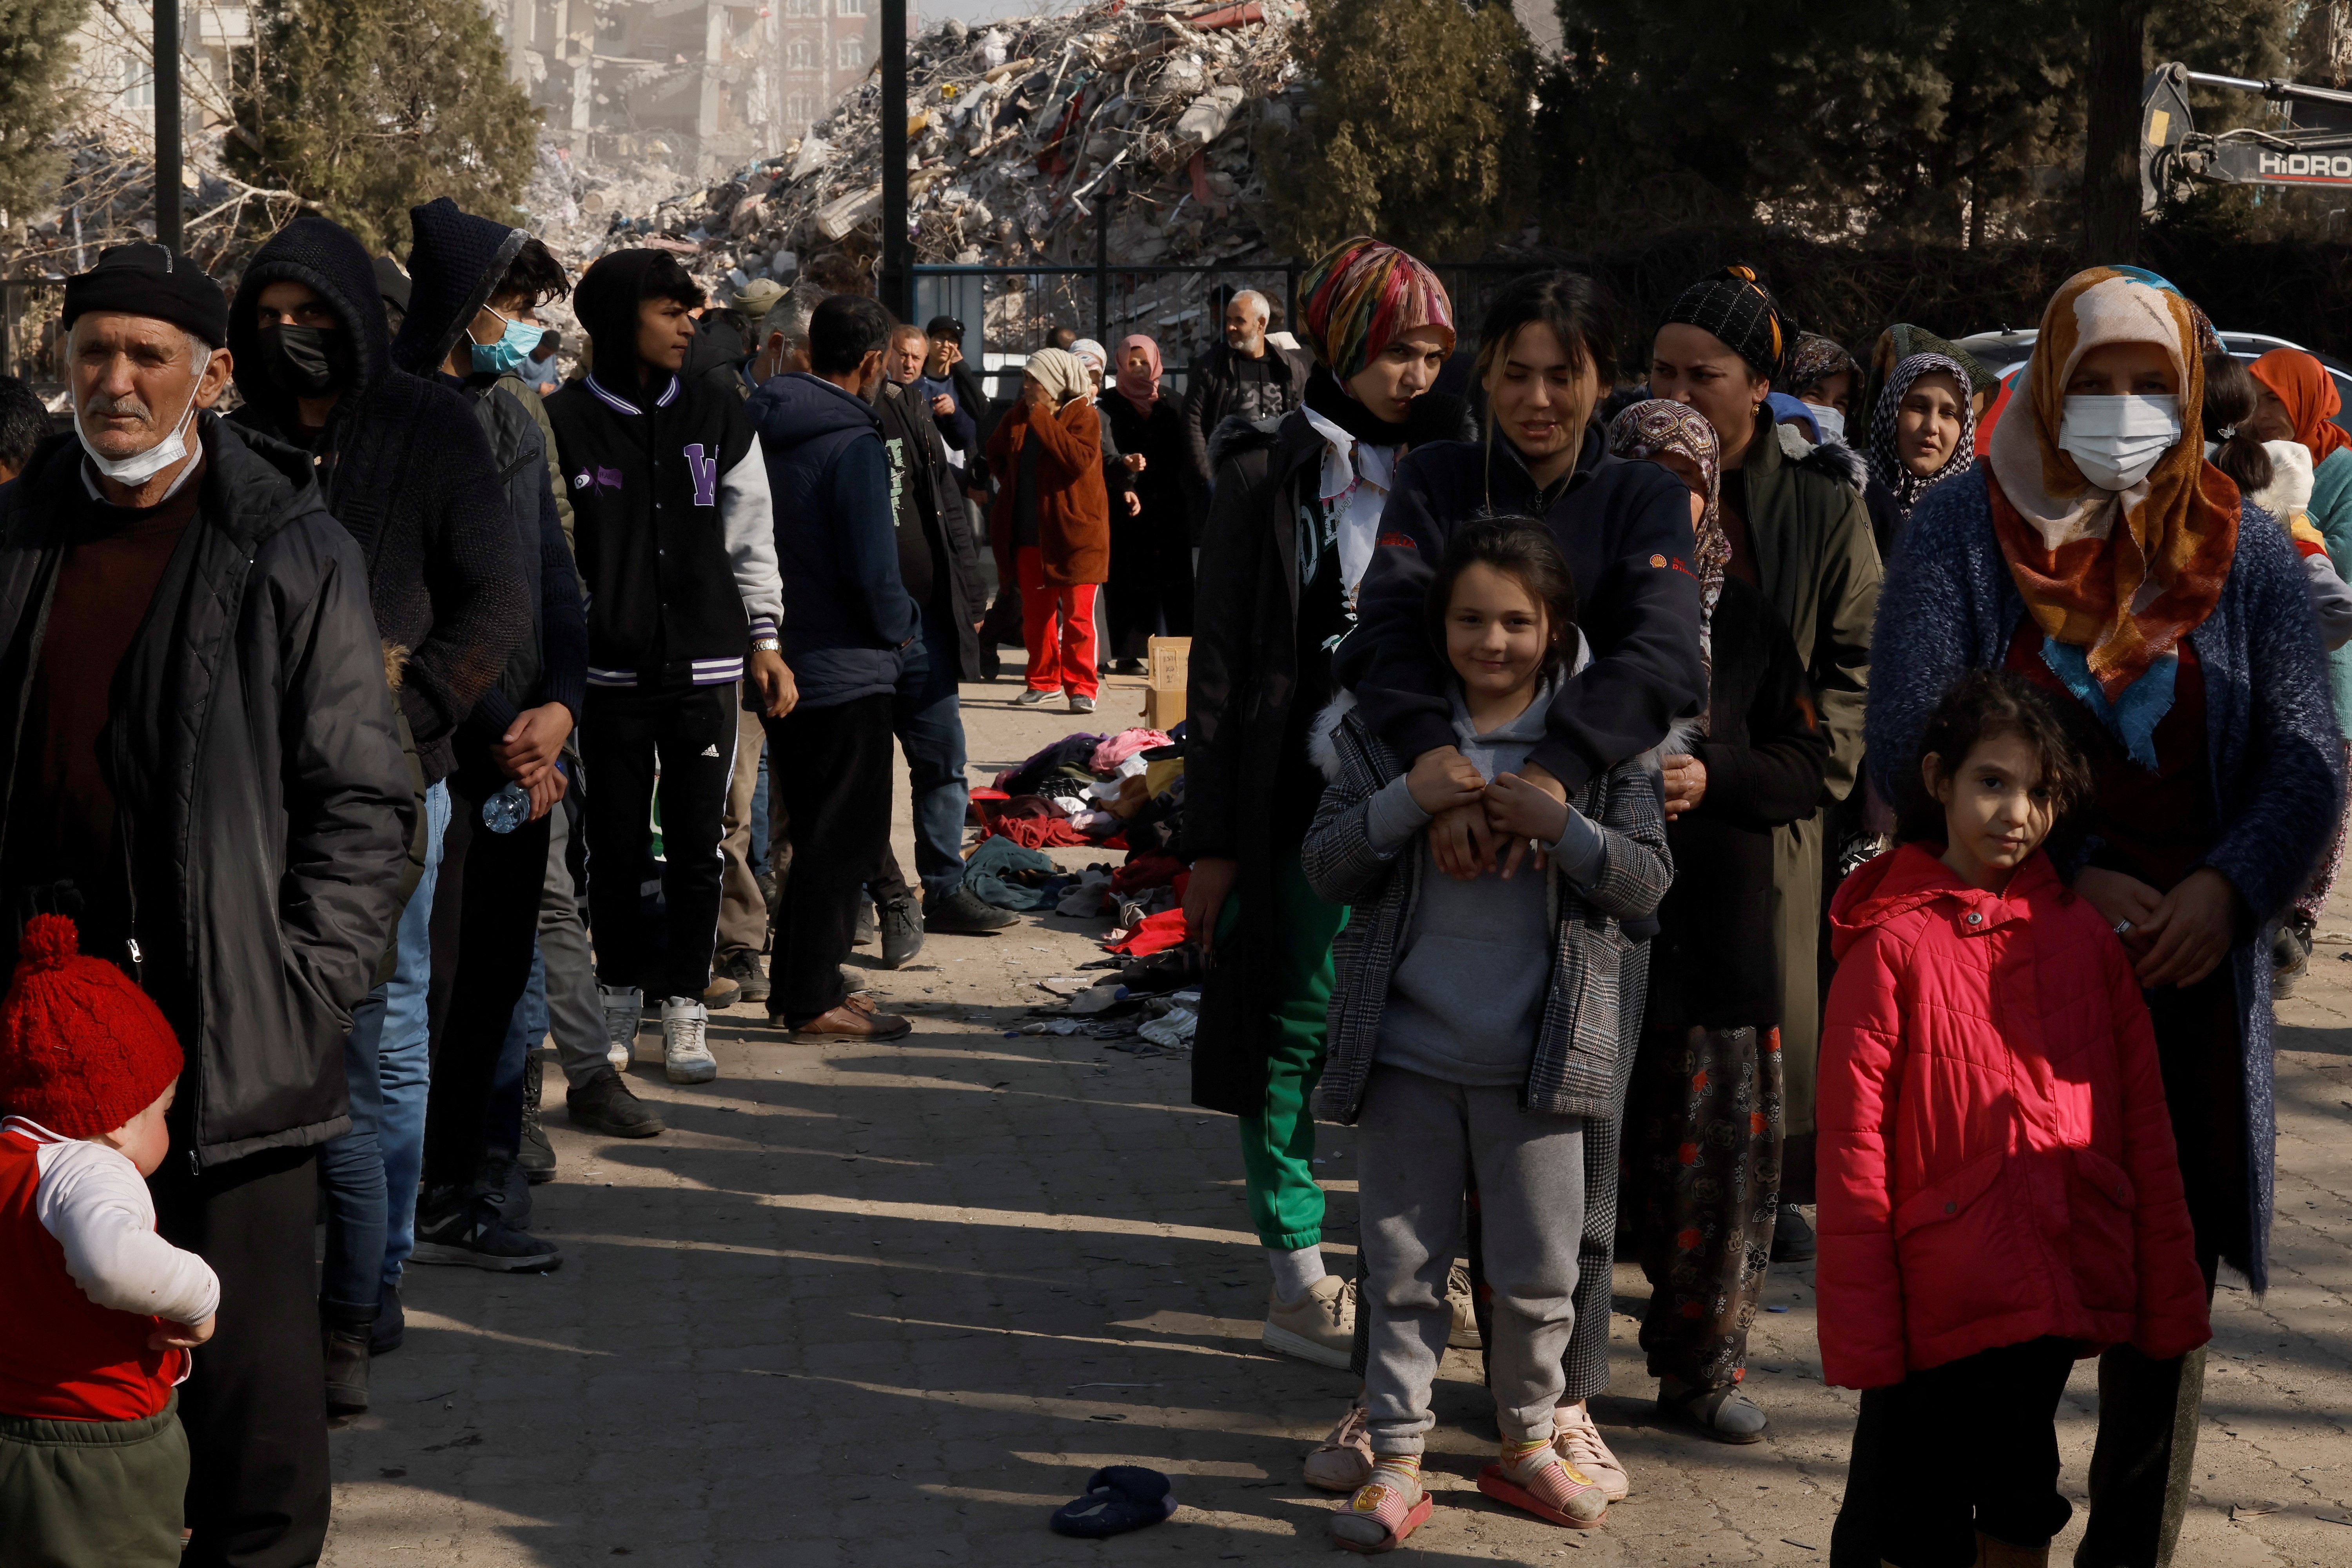 People queue for humanitarian aid, in the aftermath of a deadly earthquake, in Kahramanmaras, Turkey, February 18, 2023. Photo: Reuters